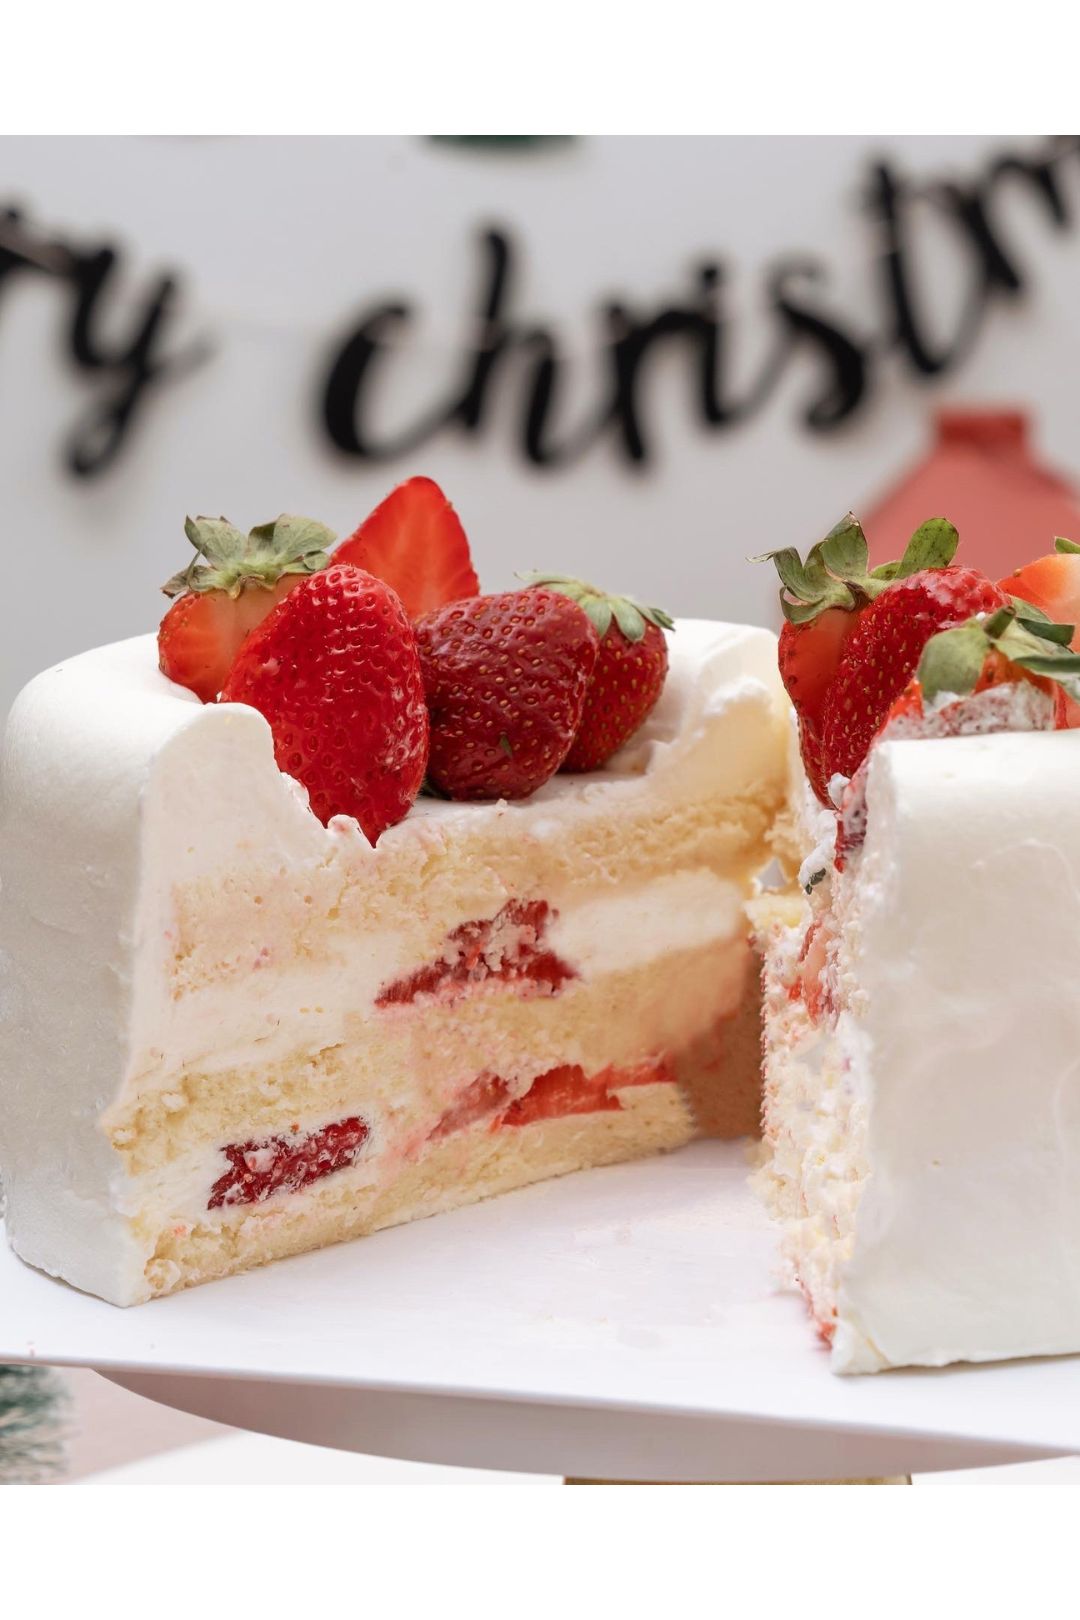 Slices and layers of Strawberry Cake